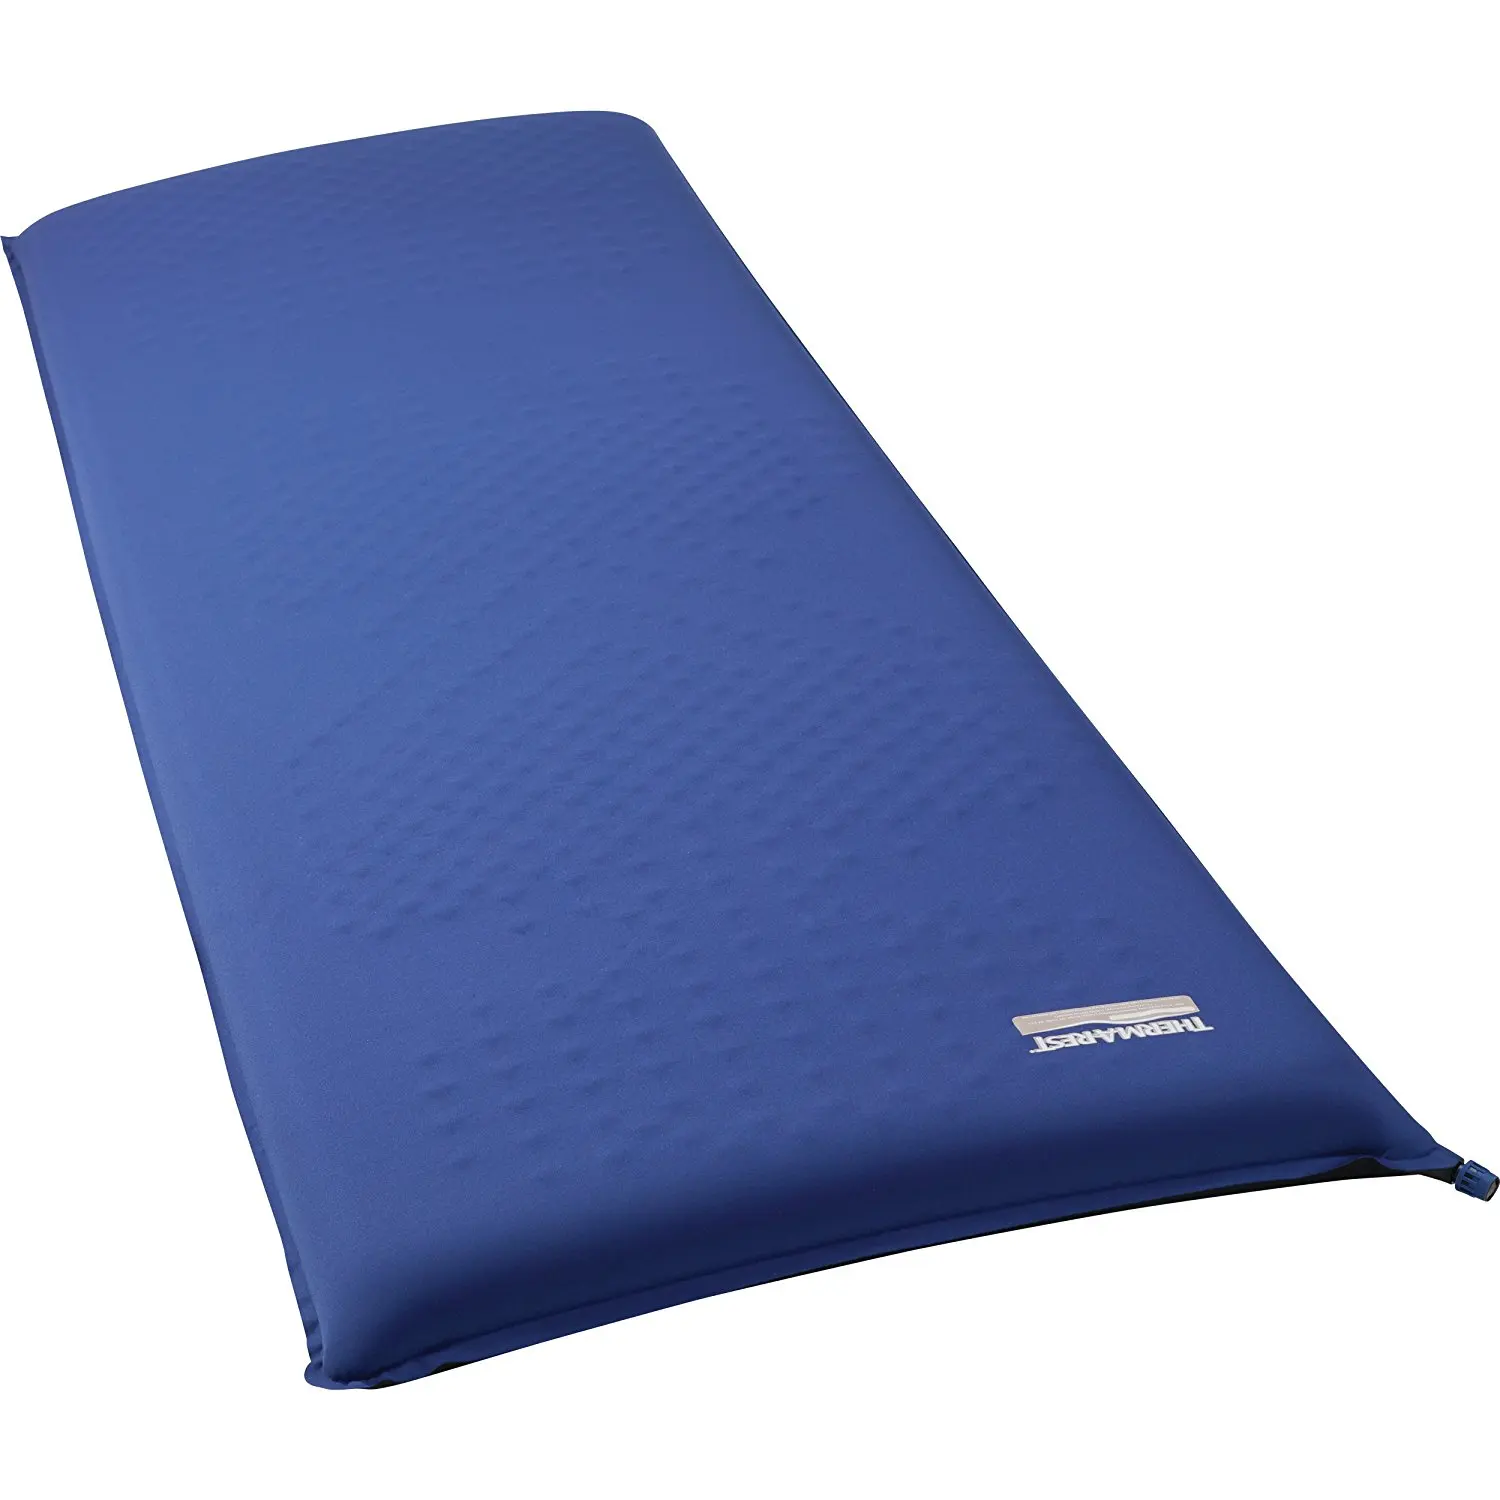 35 New Alpine design self inflating air pad for Creative Ideas